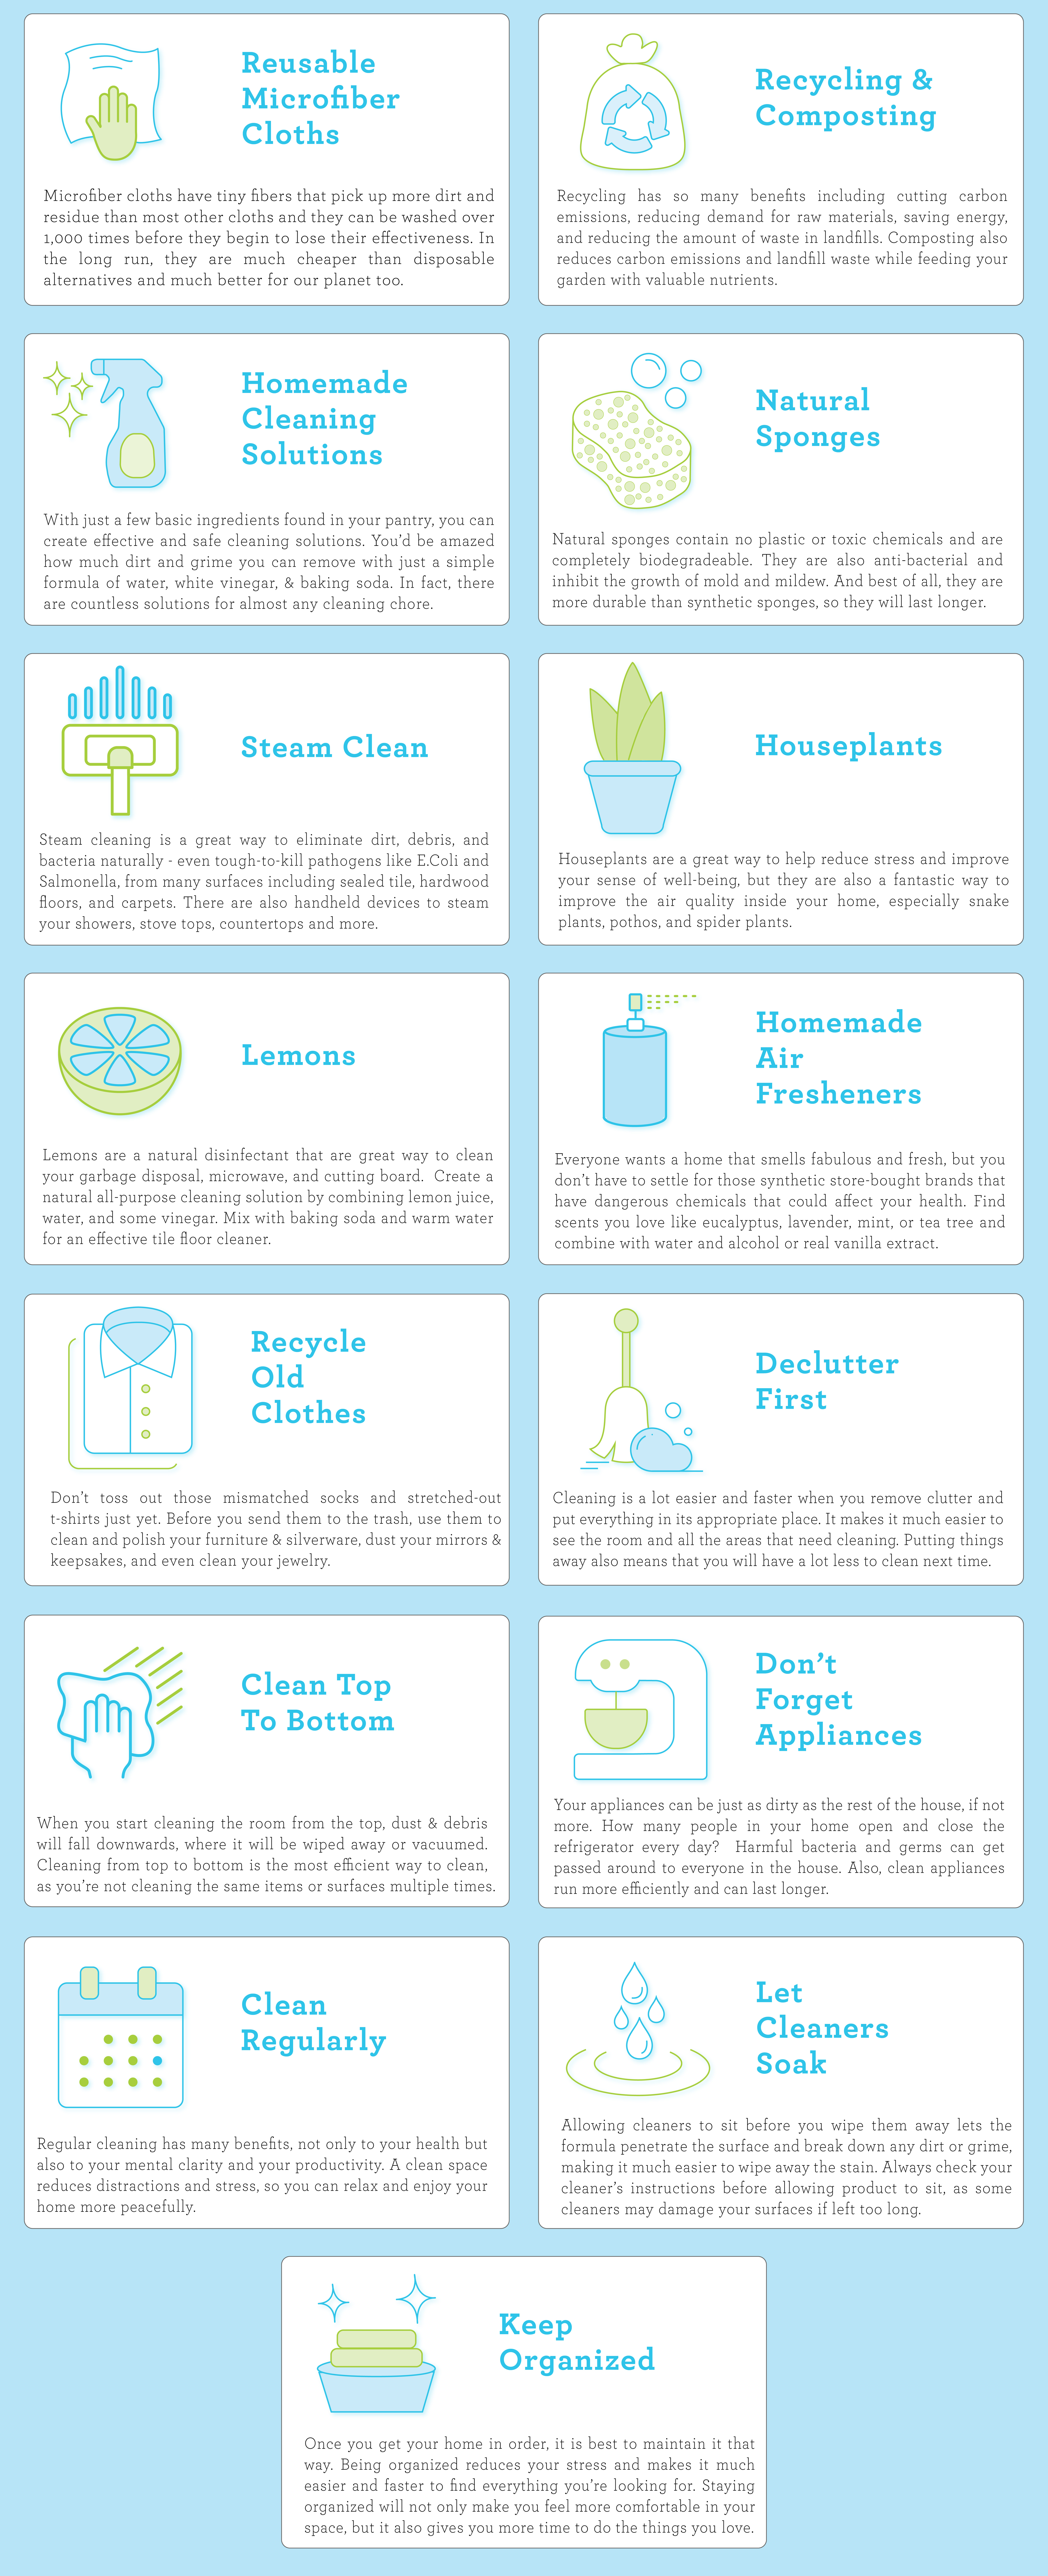 green cleaning tips for Destin